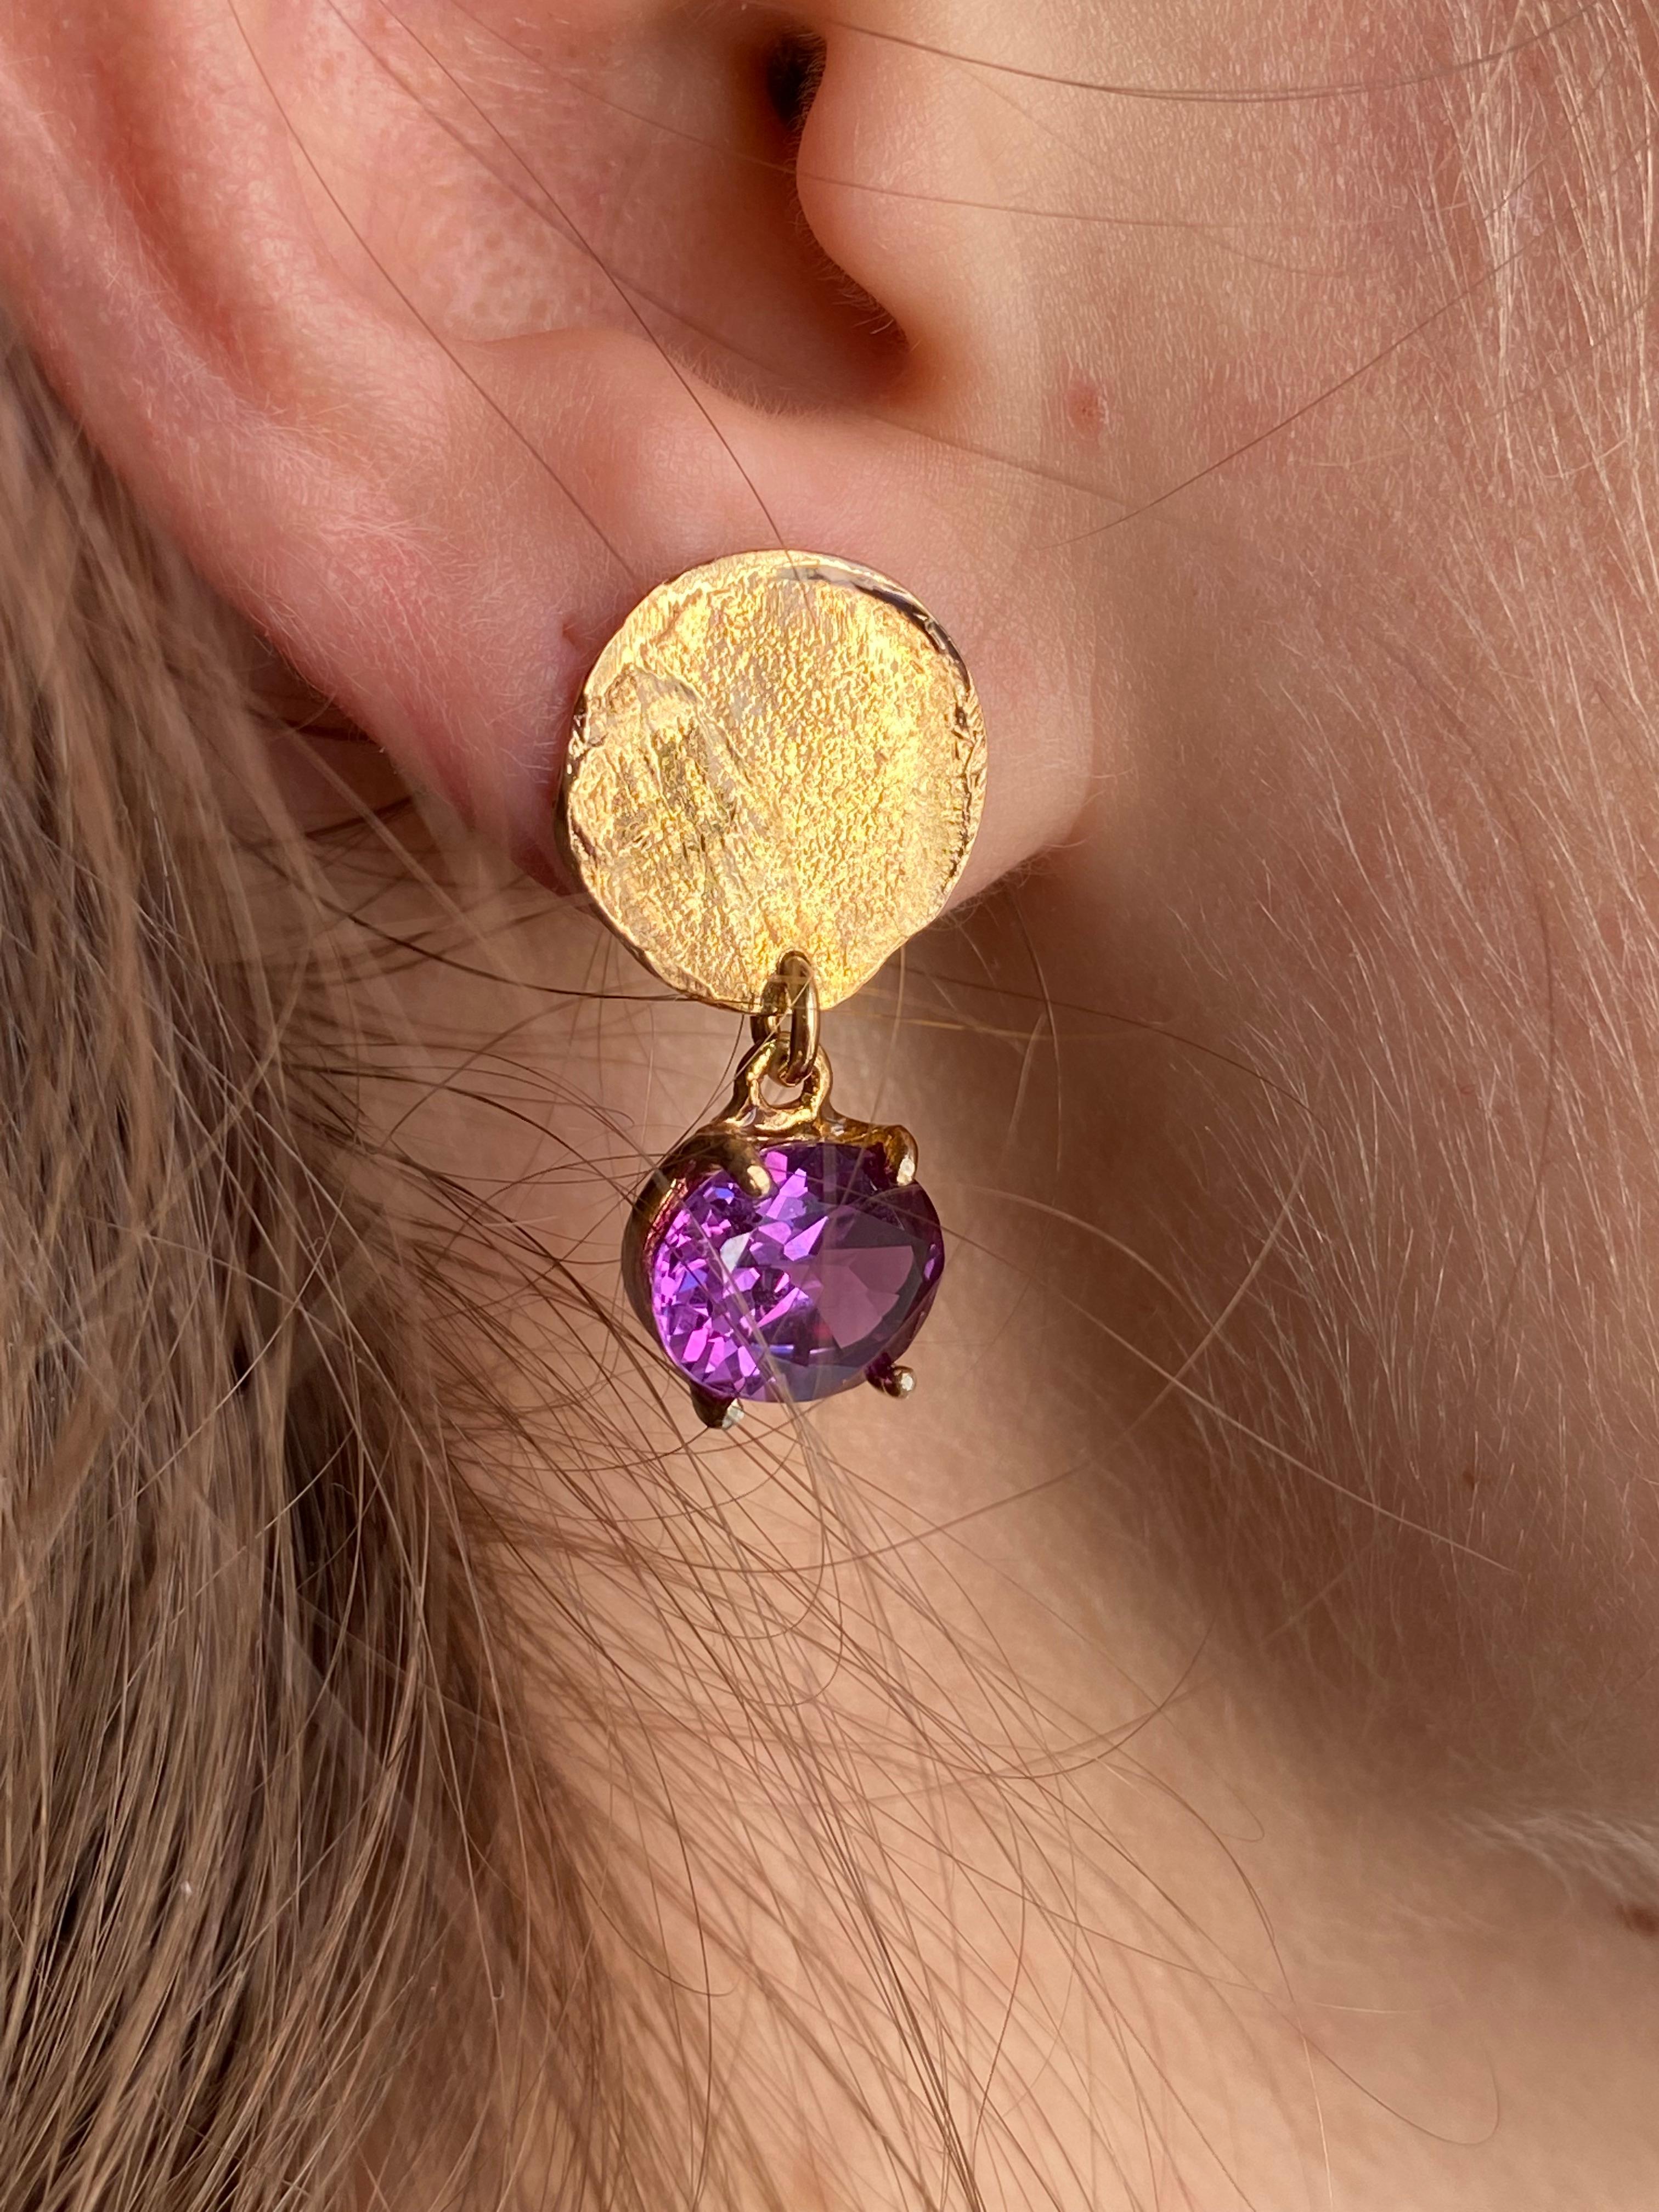  Rossella Ugolini design collection, contemporary jewels.  Handcrafted Earrings in 18 Karat Yellow Gold and Purple Amethyst . Oval cut Amethyst dangle earrings that reflect a Modern style Handcrafted in 18 Karat Yellow Gold and embellished with a